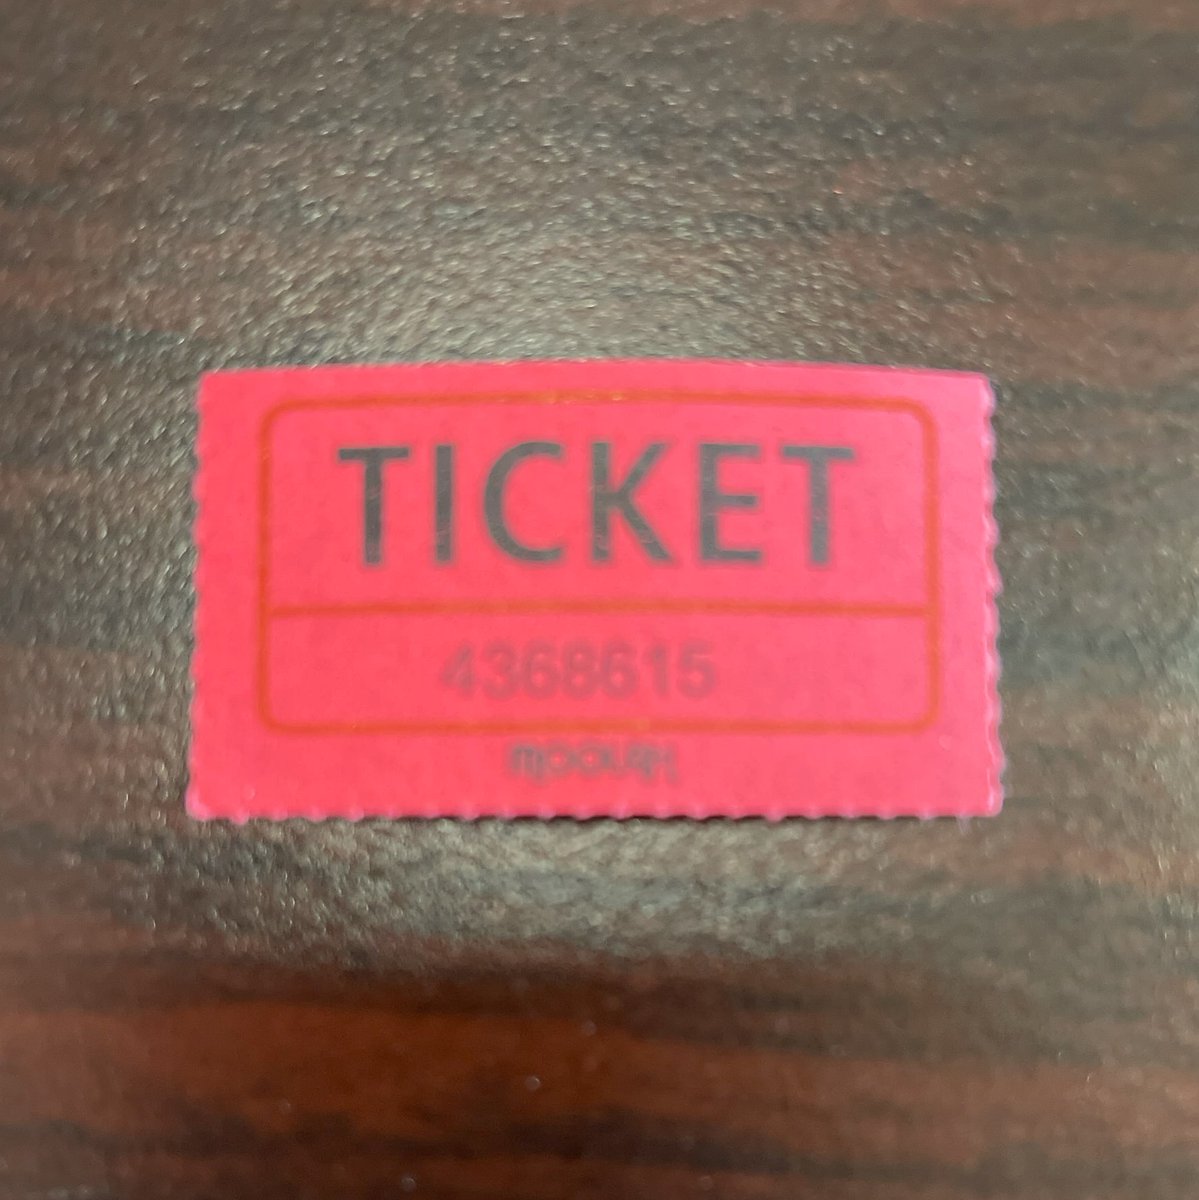 Here is the winning 50/50 ticket number! 4368615